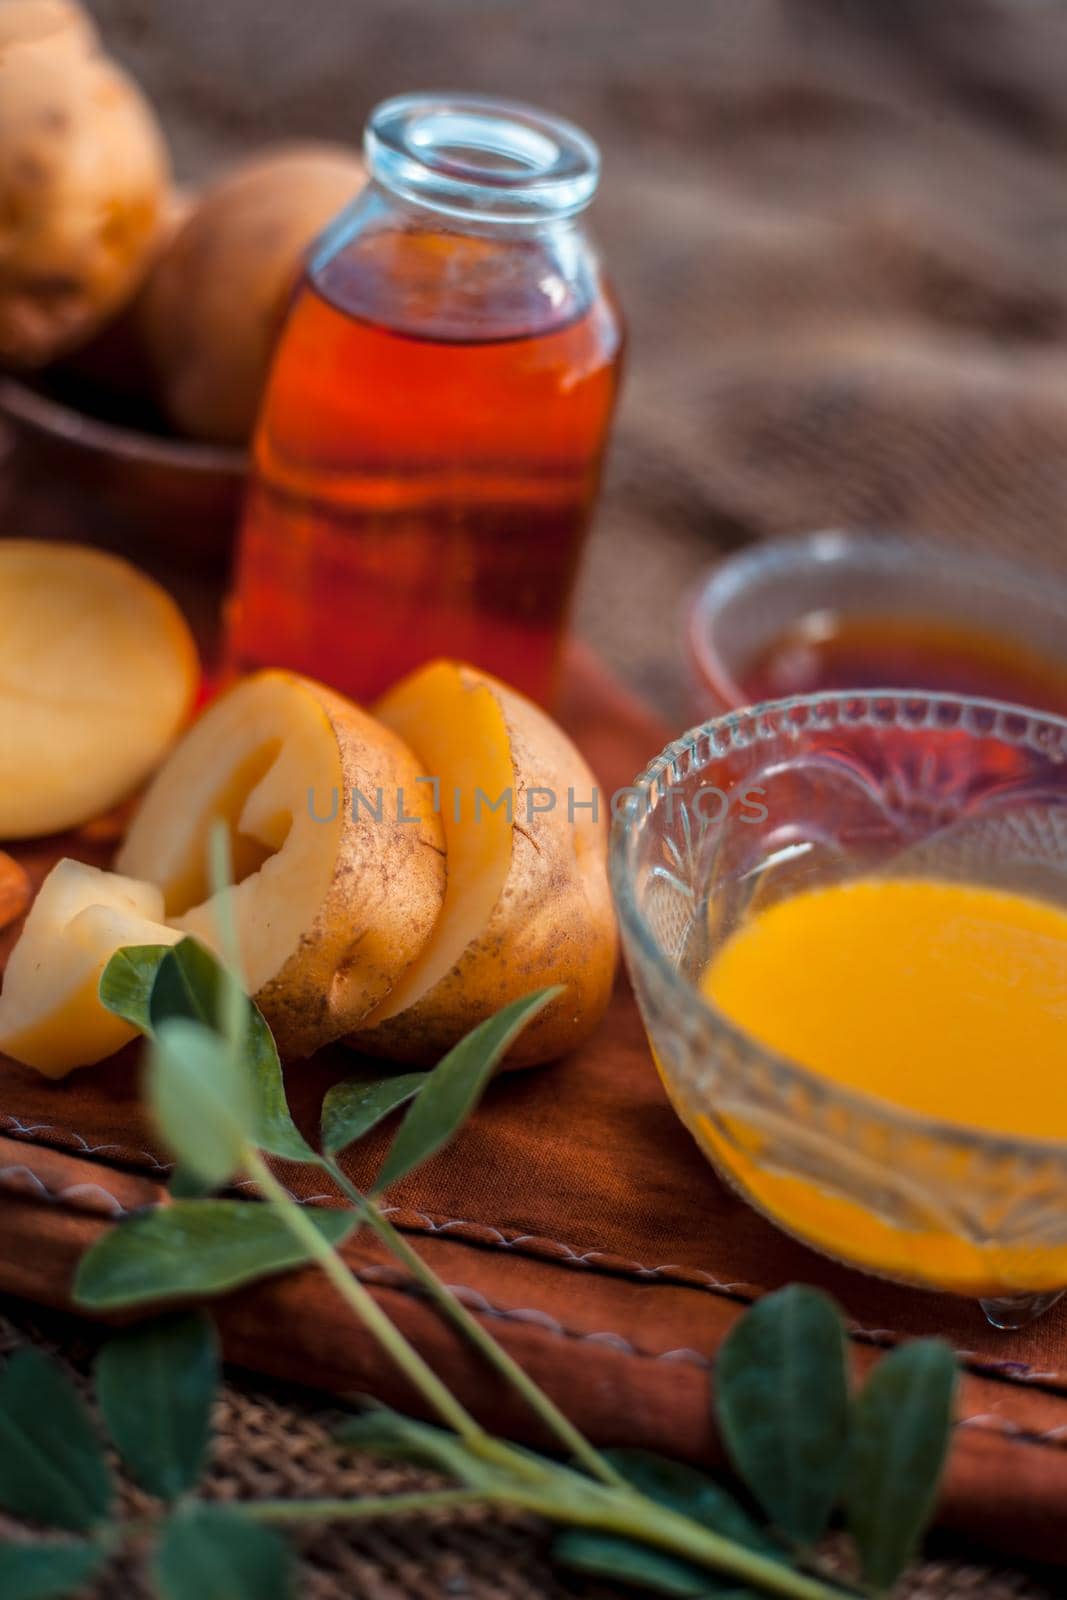 Glowing face mask of potato juice in a glass bowl on brown colored surface along with some Potato juice,honey and almond oil.Horizontal shot.To eliminate skin rashes, remove impurities,etc. by mirzamlk